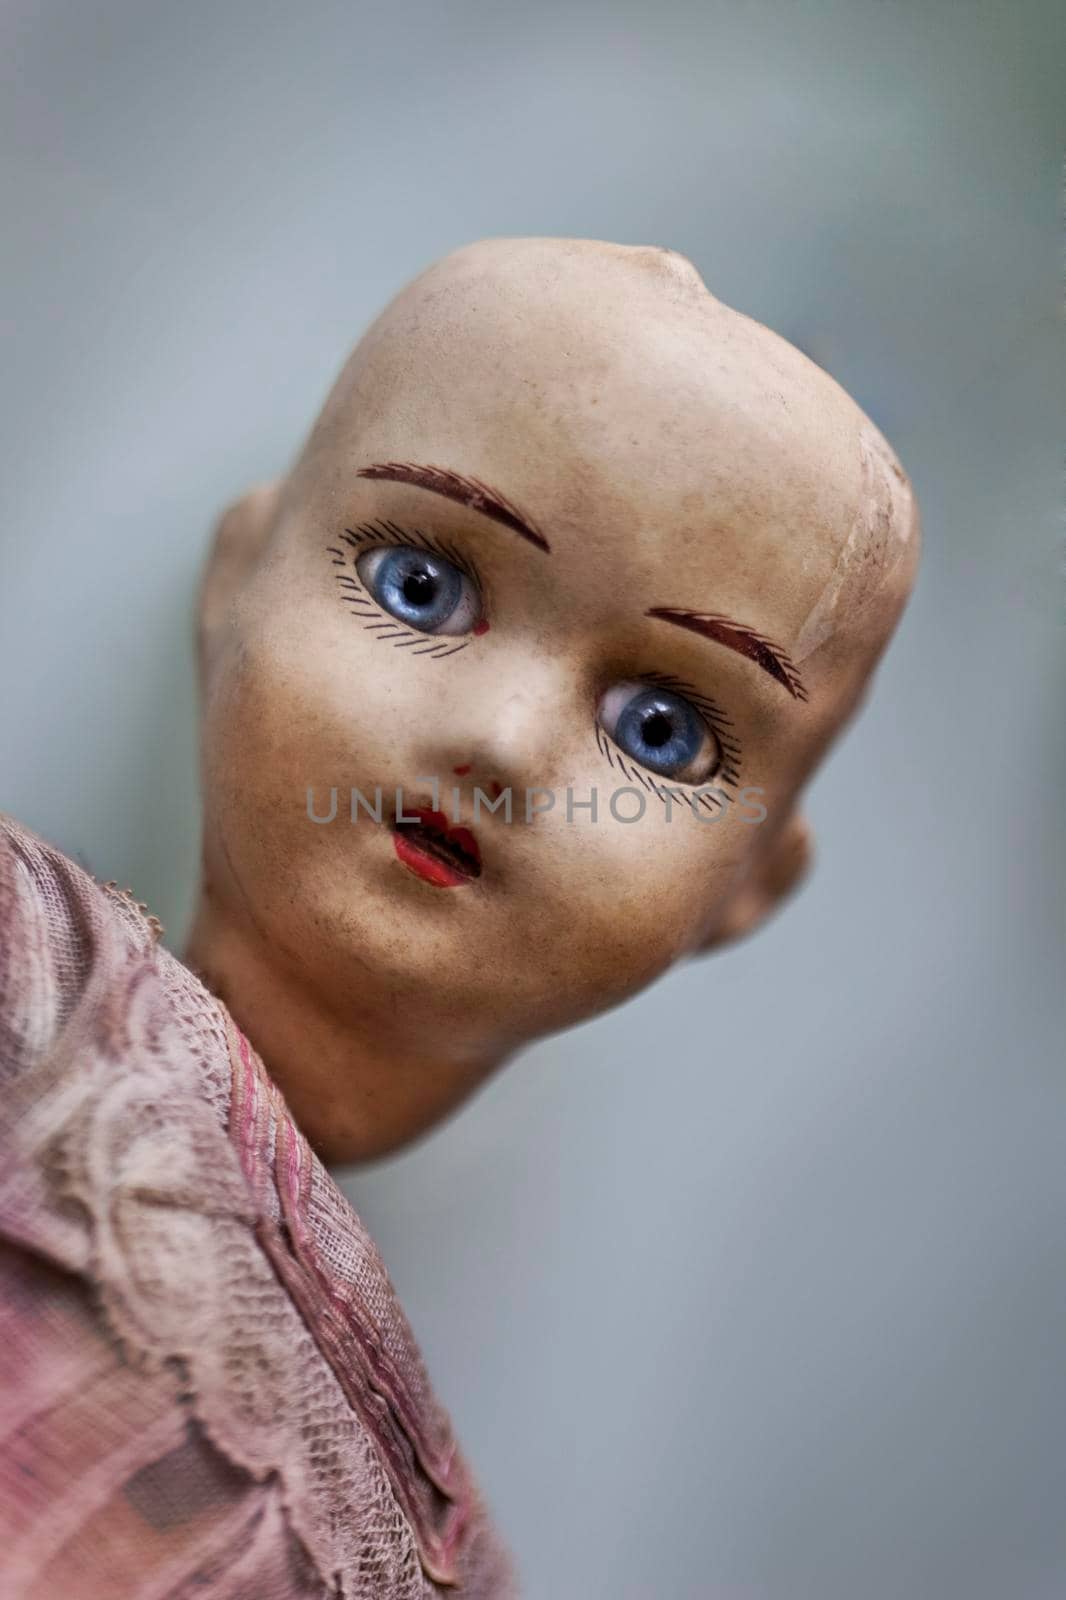 Face of an old porcelain doll in a flea market